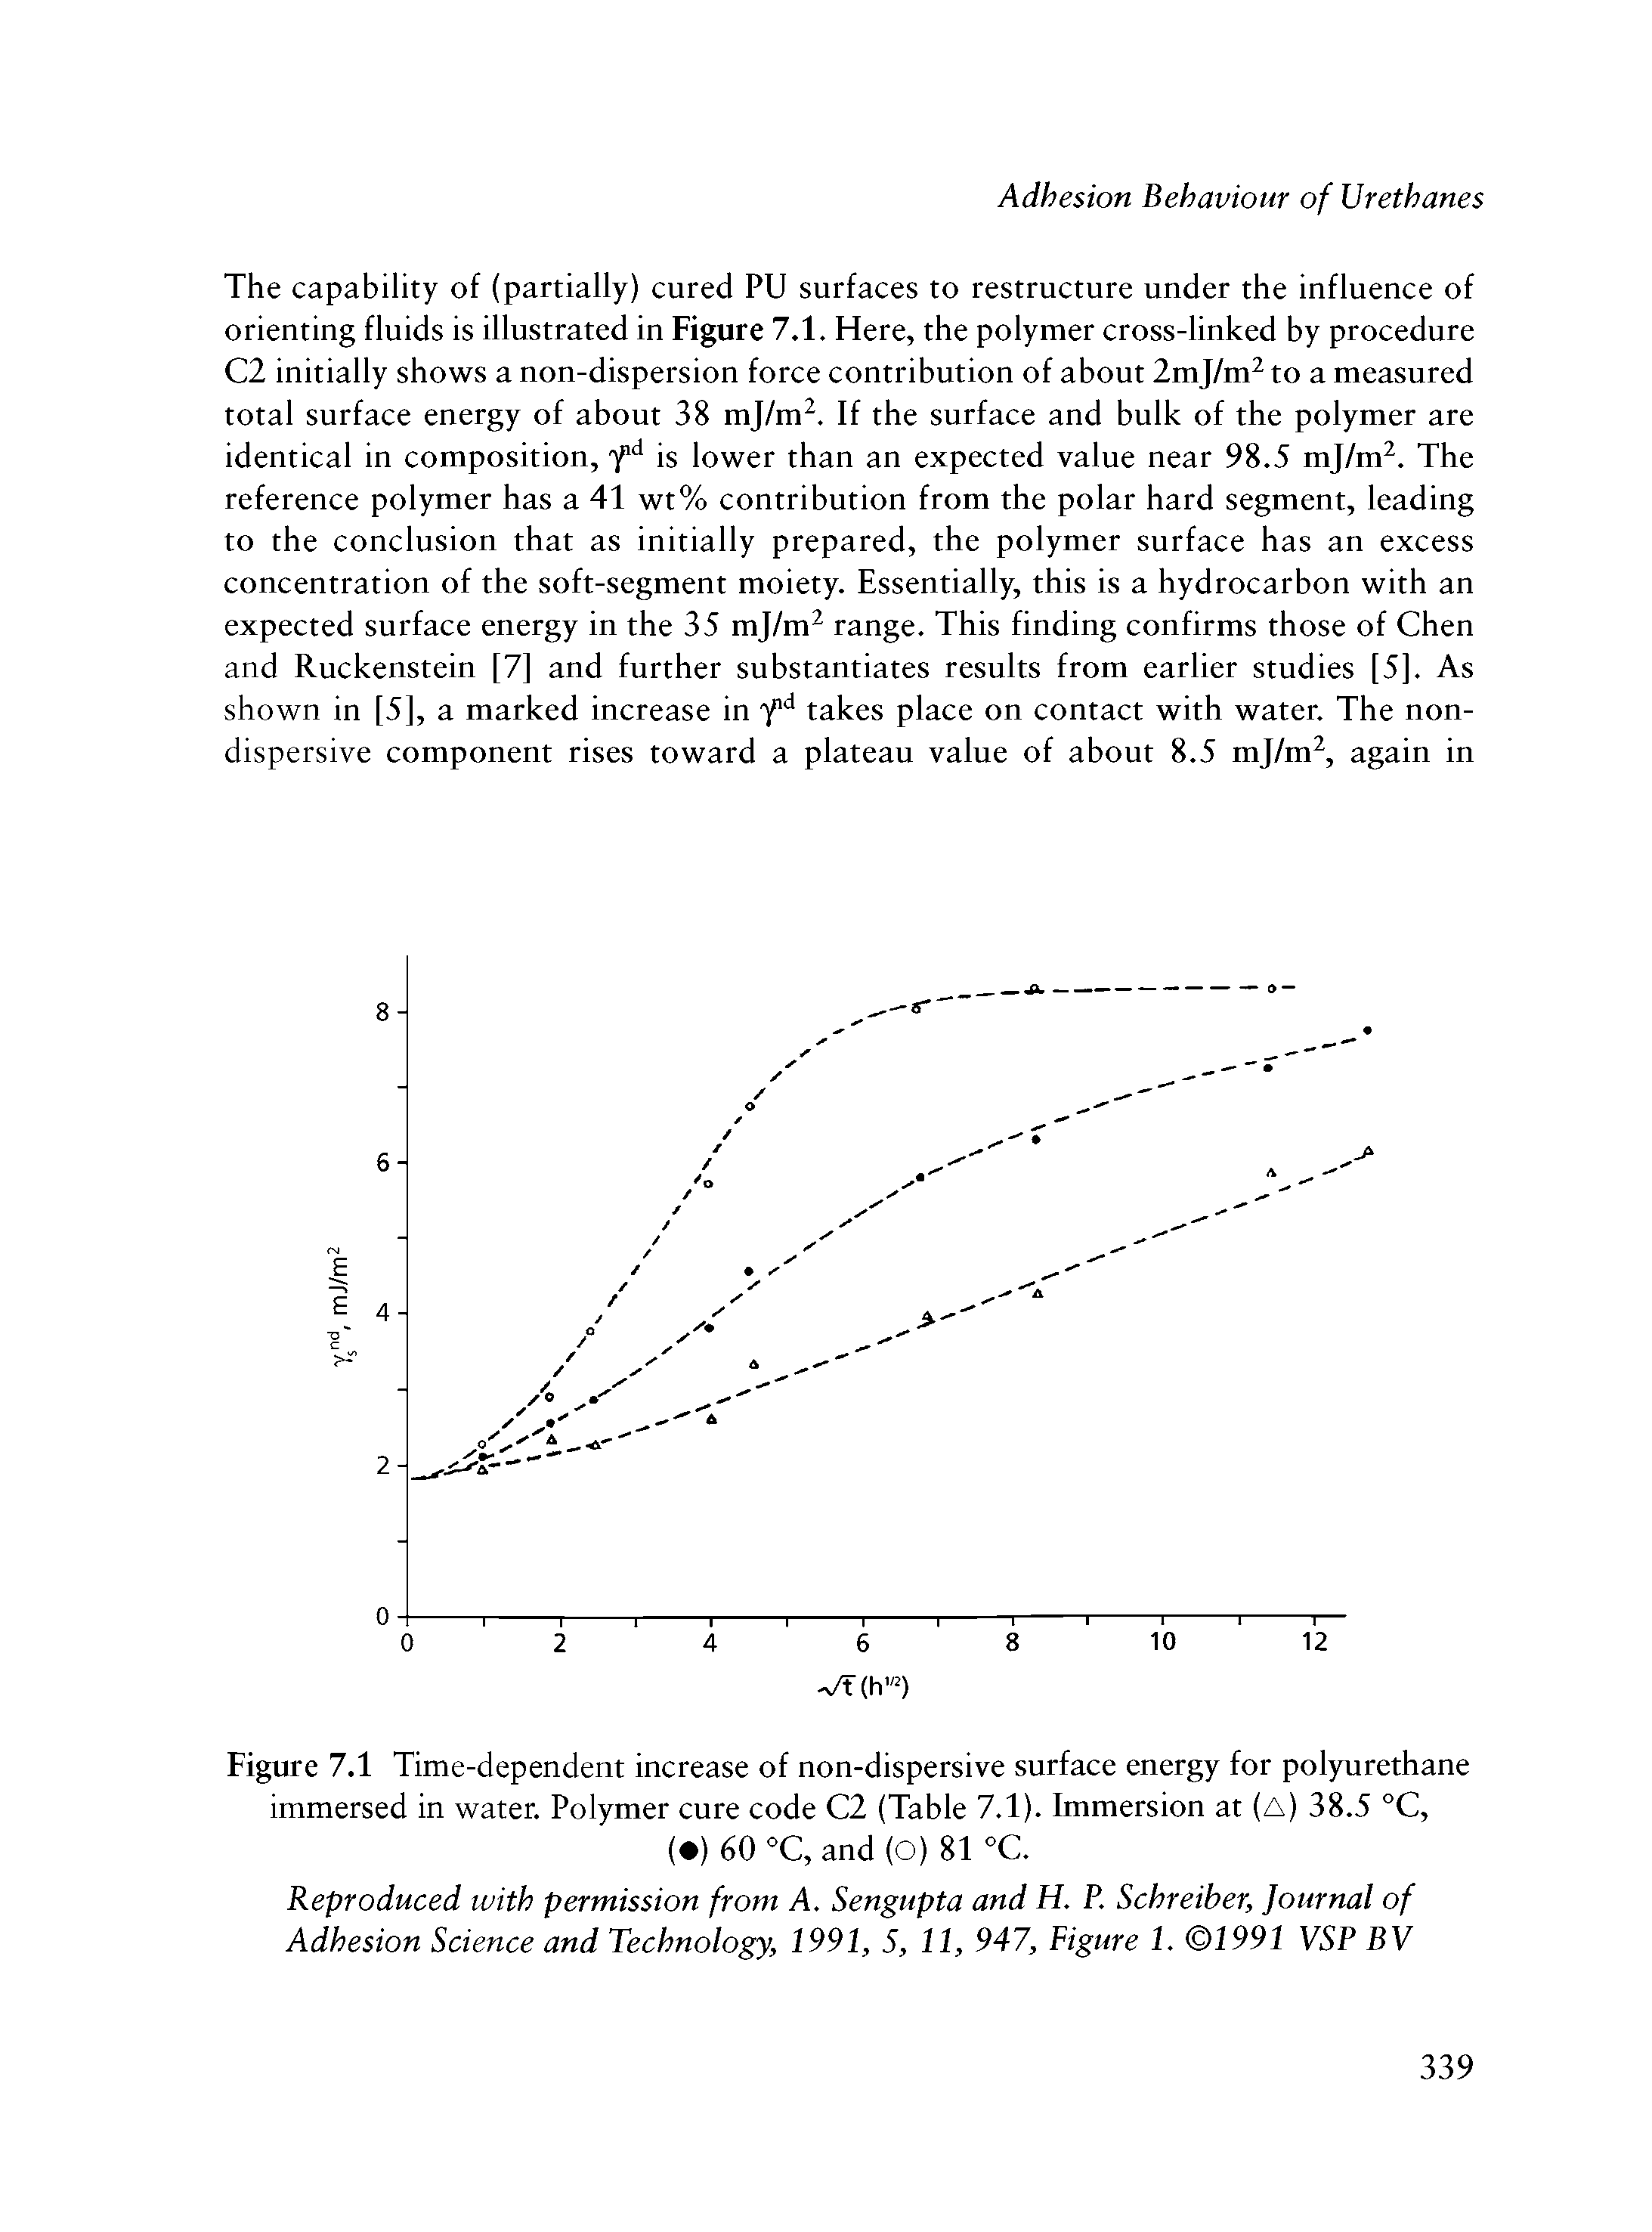 Figure 7.1 Time-dependent increase of non-dispersive surface energy for polyurethane immersed in water. Polymer cure code C2 (Table 7.1). Immersion at (a) 38.5 °C,...